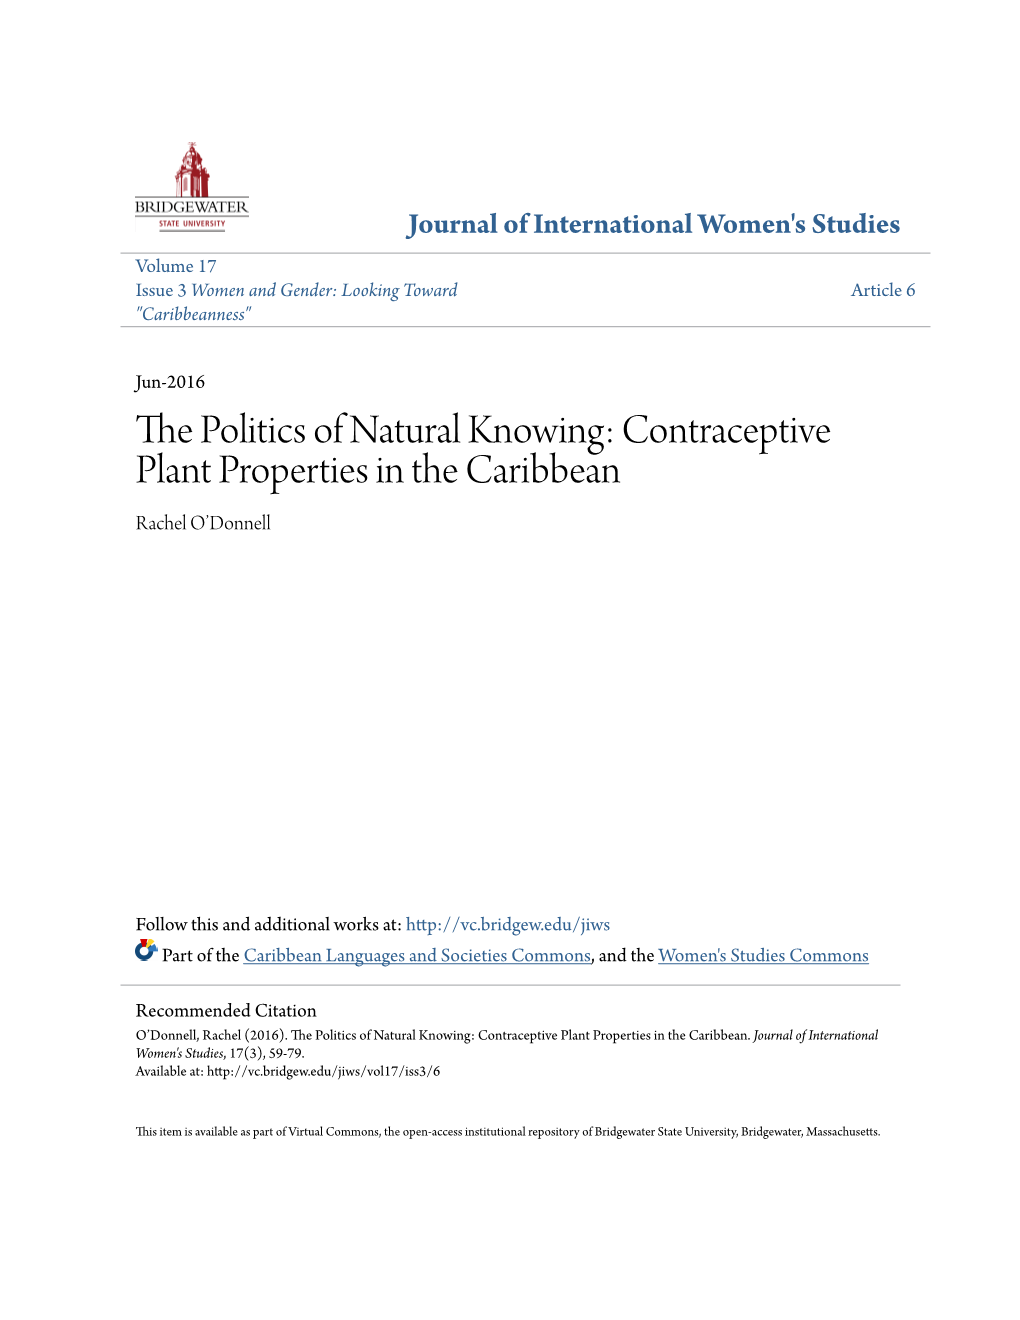 The Politics of Natural Knowing: Contraceptive Plant Properties in the Caribbean